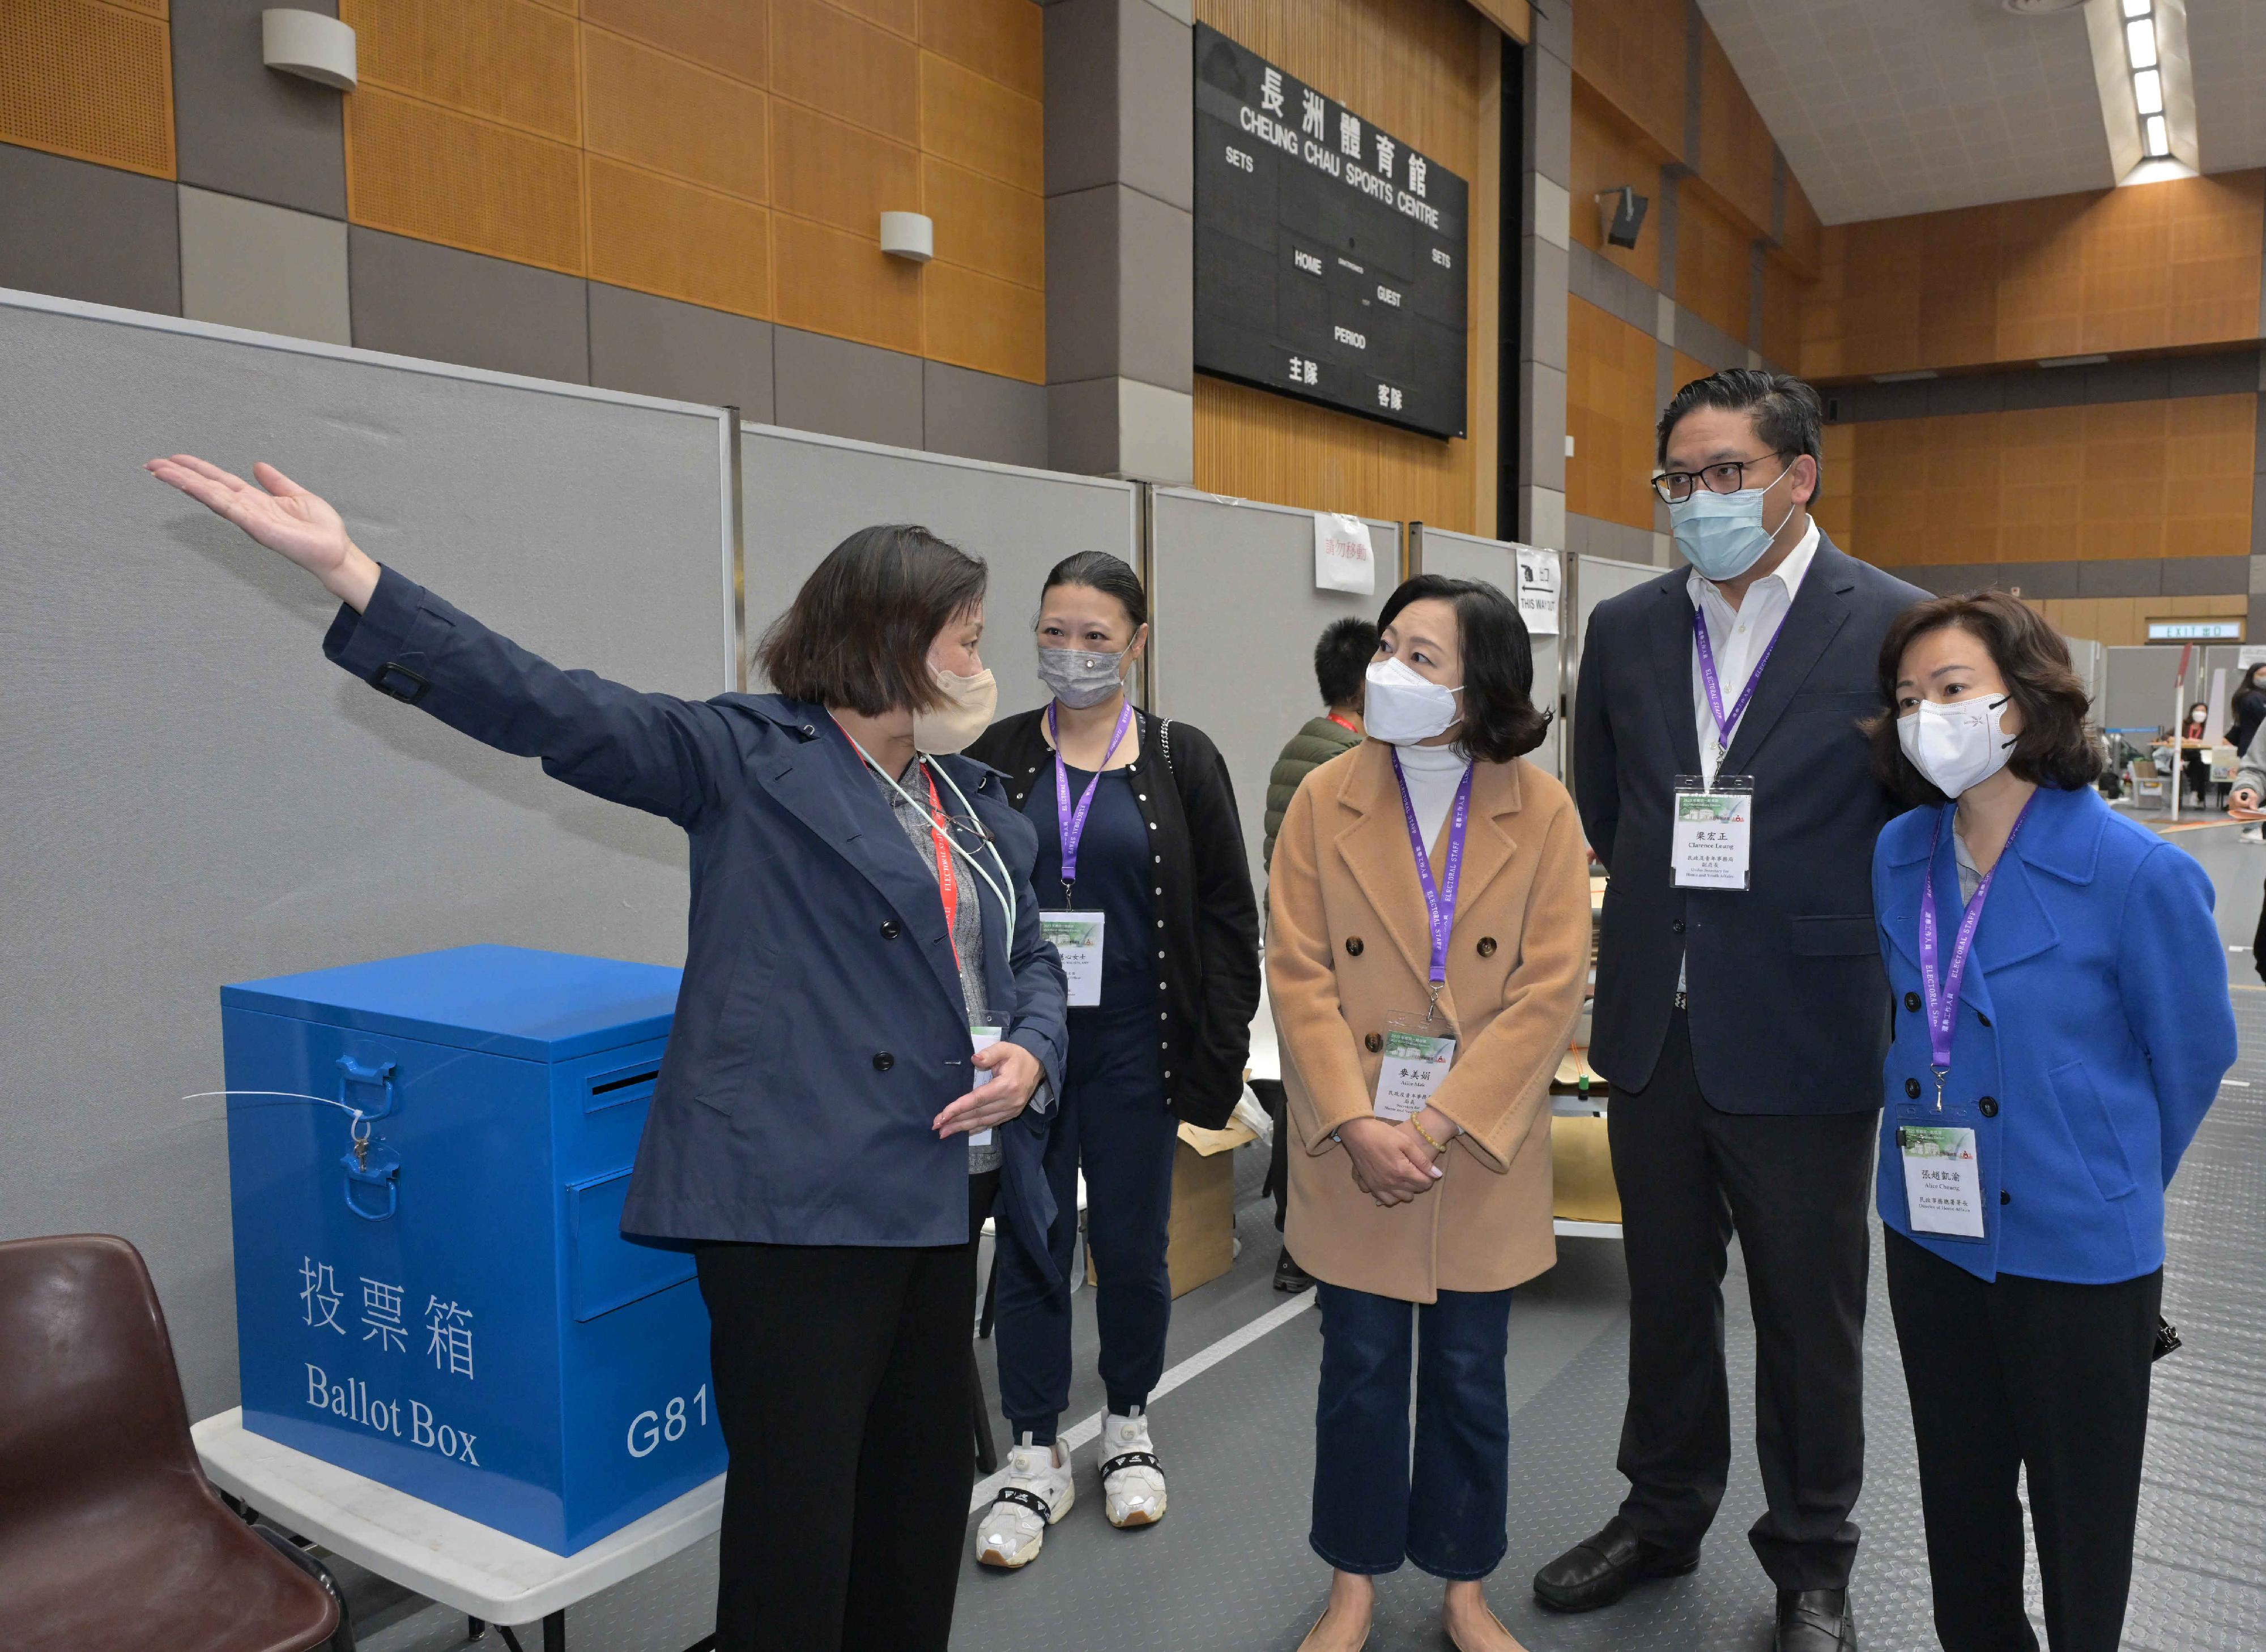 The Secretary for Home and Youth Affairs, Miss Alice Mak, today (January 15) visited a Kaifong Representative Election polling station for Cheung Chau Market Town at Cheung Chau Sports Centre. Photo shows Miss Mak (centre), the Under Secretary for Home and Youth Affairs, Mr Clarence Leung (second right); the Director of Home Affairs, Mrs Alice Cheung (first right) and the District Officer (Islands), Miss Amy Yeung (second left) observing the operation of the polling station.